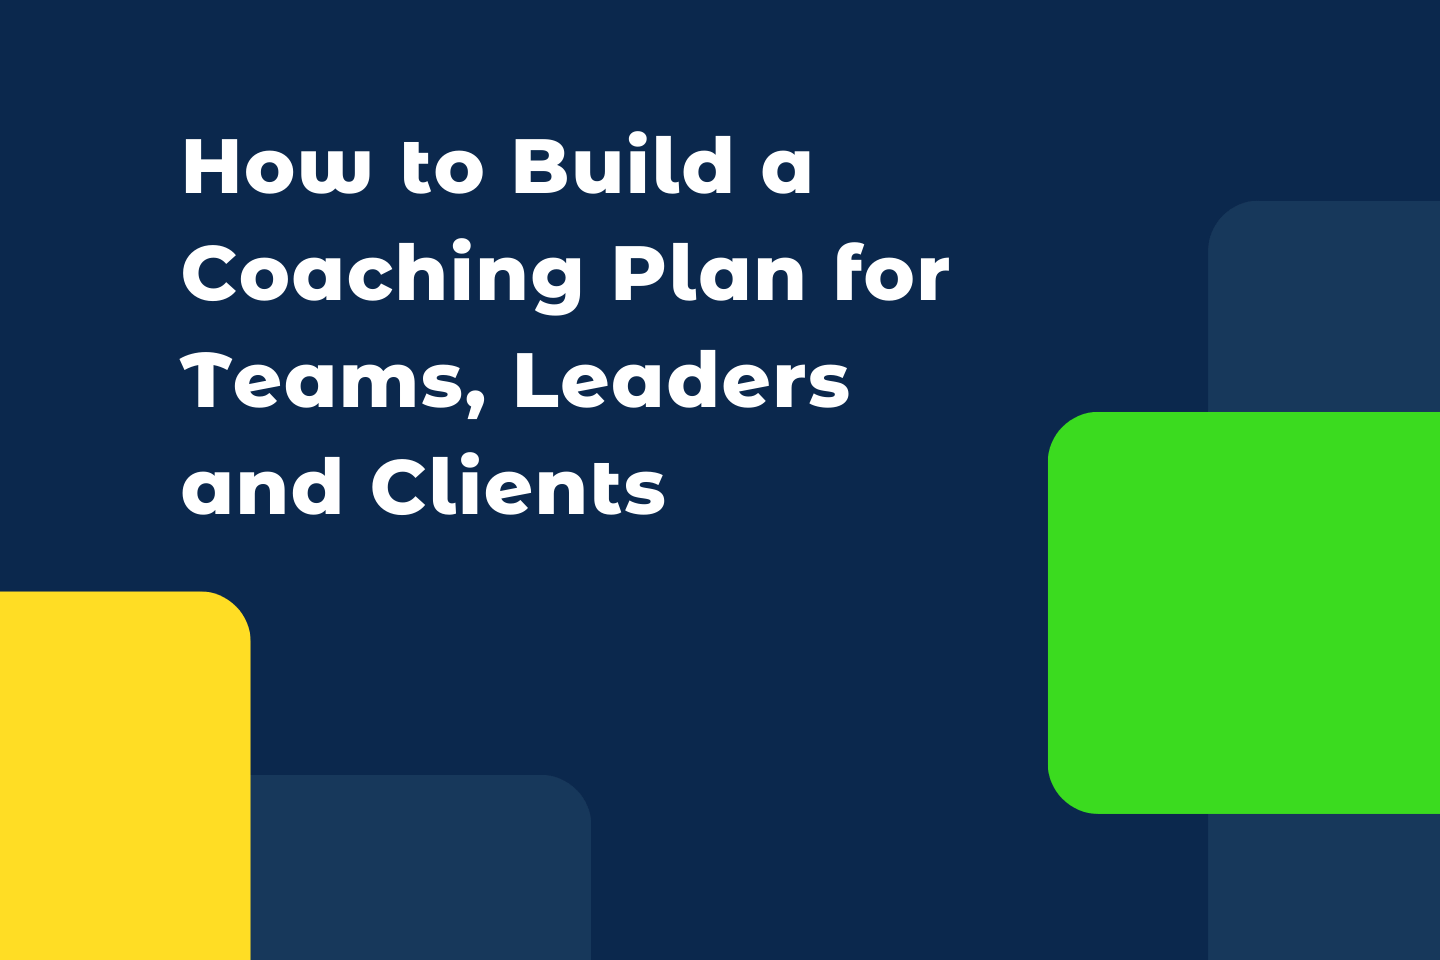 How to Build a Coaching Plan for Teams, Leaders and Clients